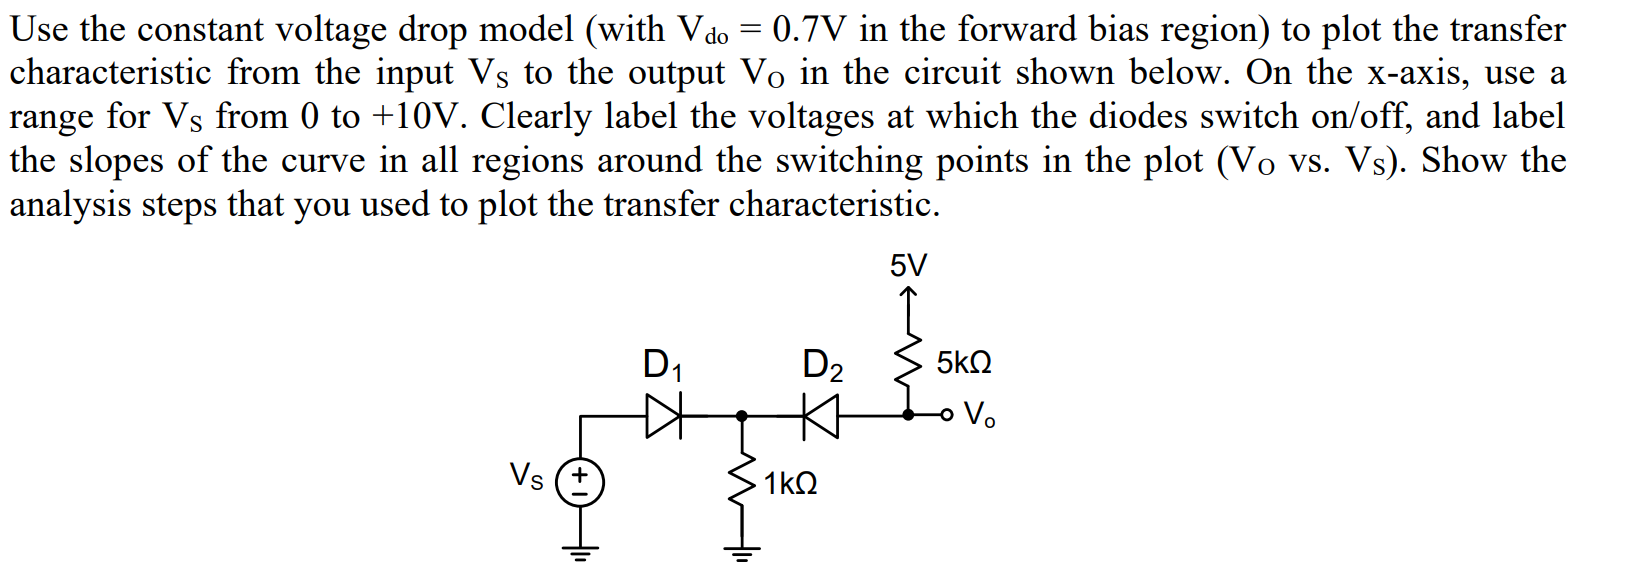 Use the constant voltage drop model (with Vdo = 0.7V in the forward bias region) to plot the transfer
characteristic from the input Vs to the output Vo in the circuit shown below. On the x-axis, use a
range for Vs from 0 to +10V. Clearly label the voltages at which the diodes switch on/off, and label
the slopes of the curve in all regions around the switching points in the plot (Vo vs. Vs). Show the
analysis steps that you used to plot the transfer characteristic.
5V
D2
5kΩ
D1
o Vo
Vs
1kΩ
